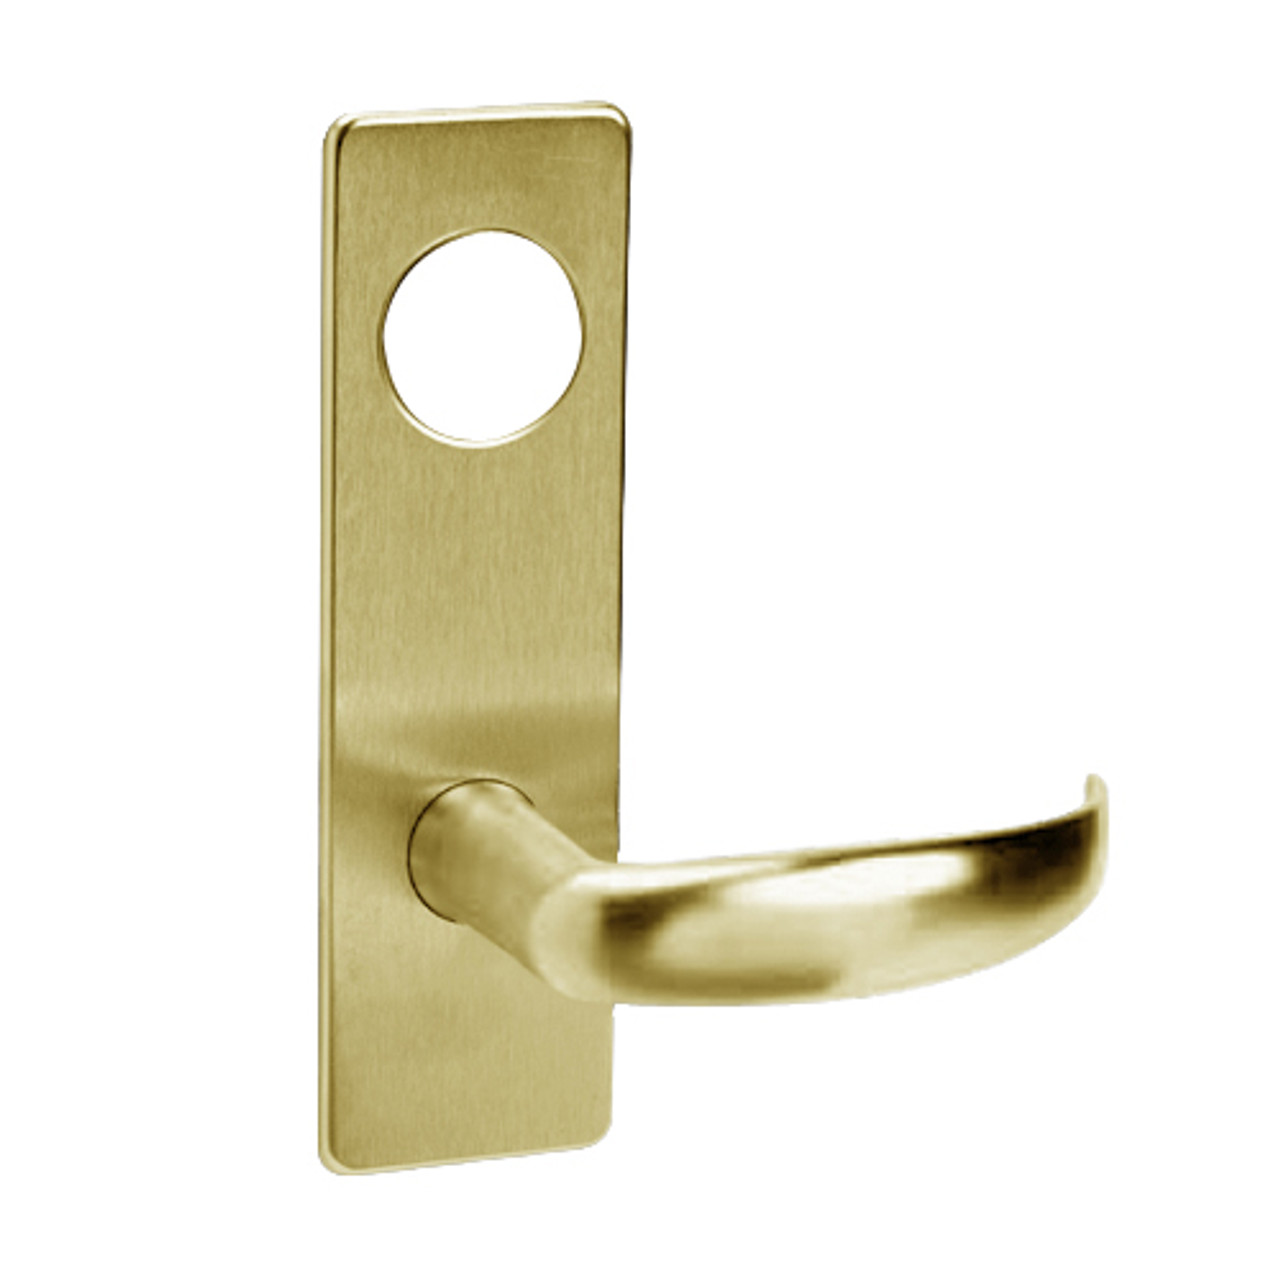 ML2029-PSP-606 Corbin Russwin ML2000 Series Mortise Hotel Locksets with Princeton Lever and Deadbolt in Satin Brass